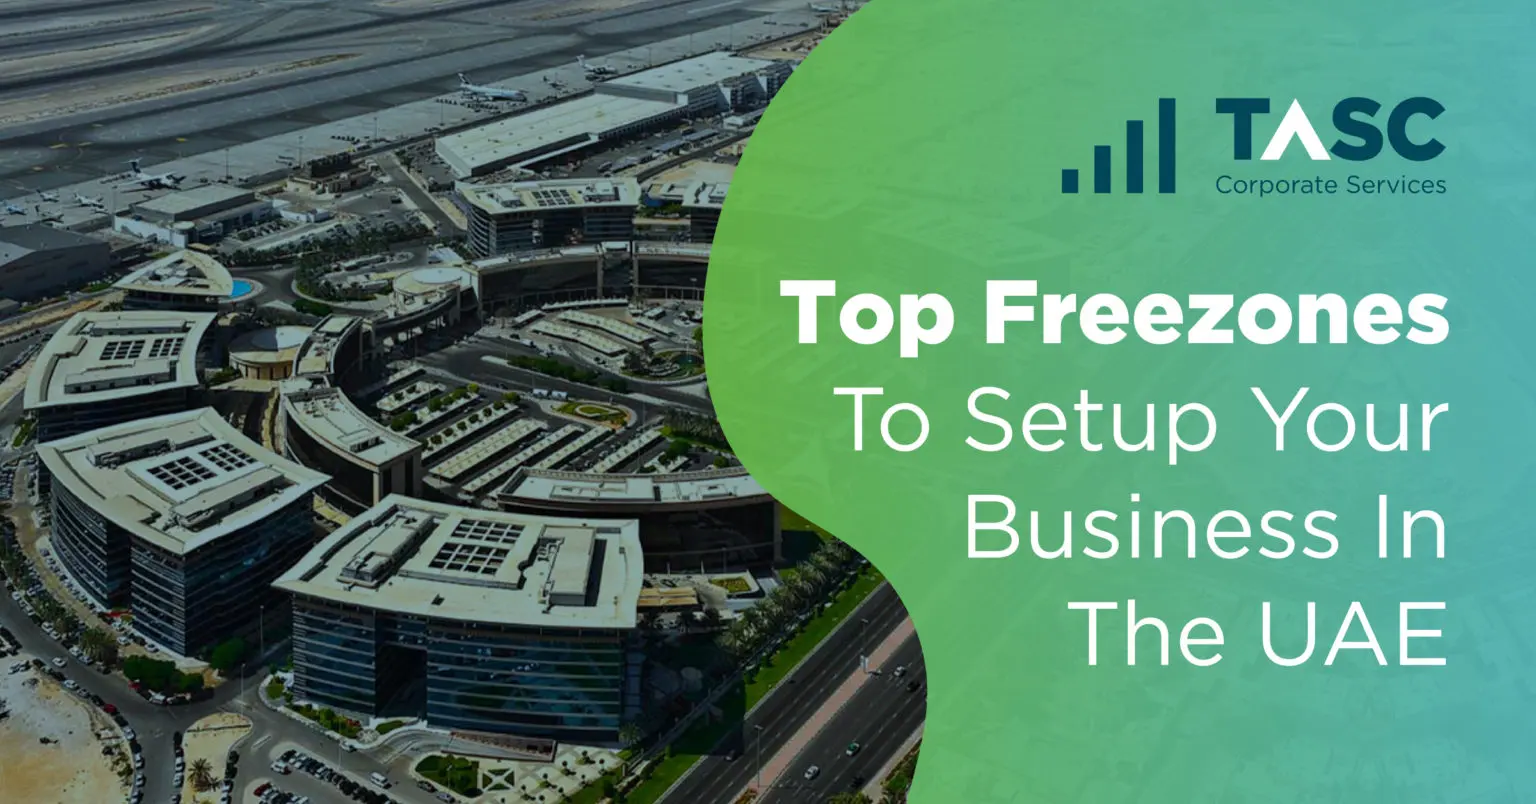 Top Freezones To Setup Your Business In The UAE